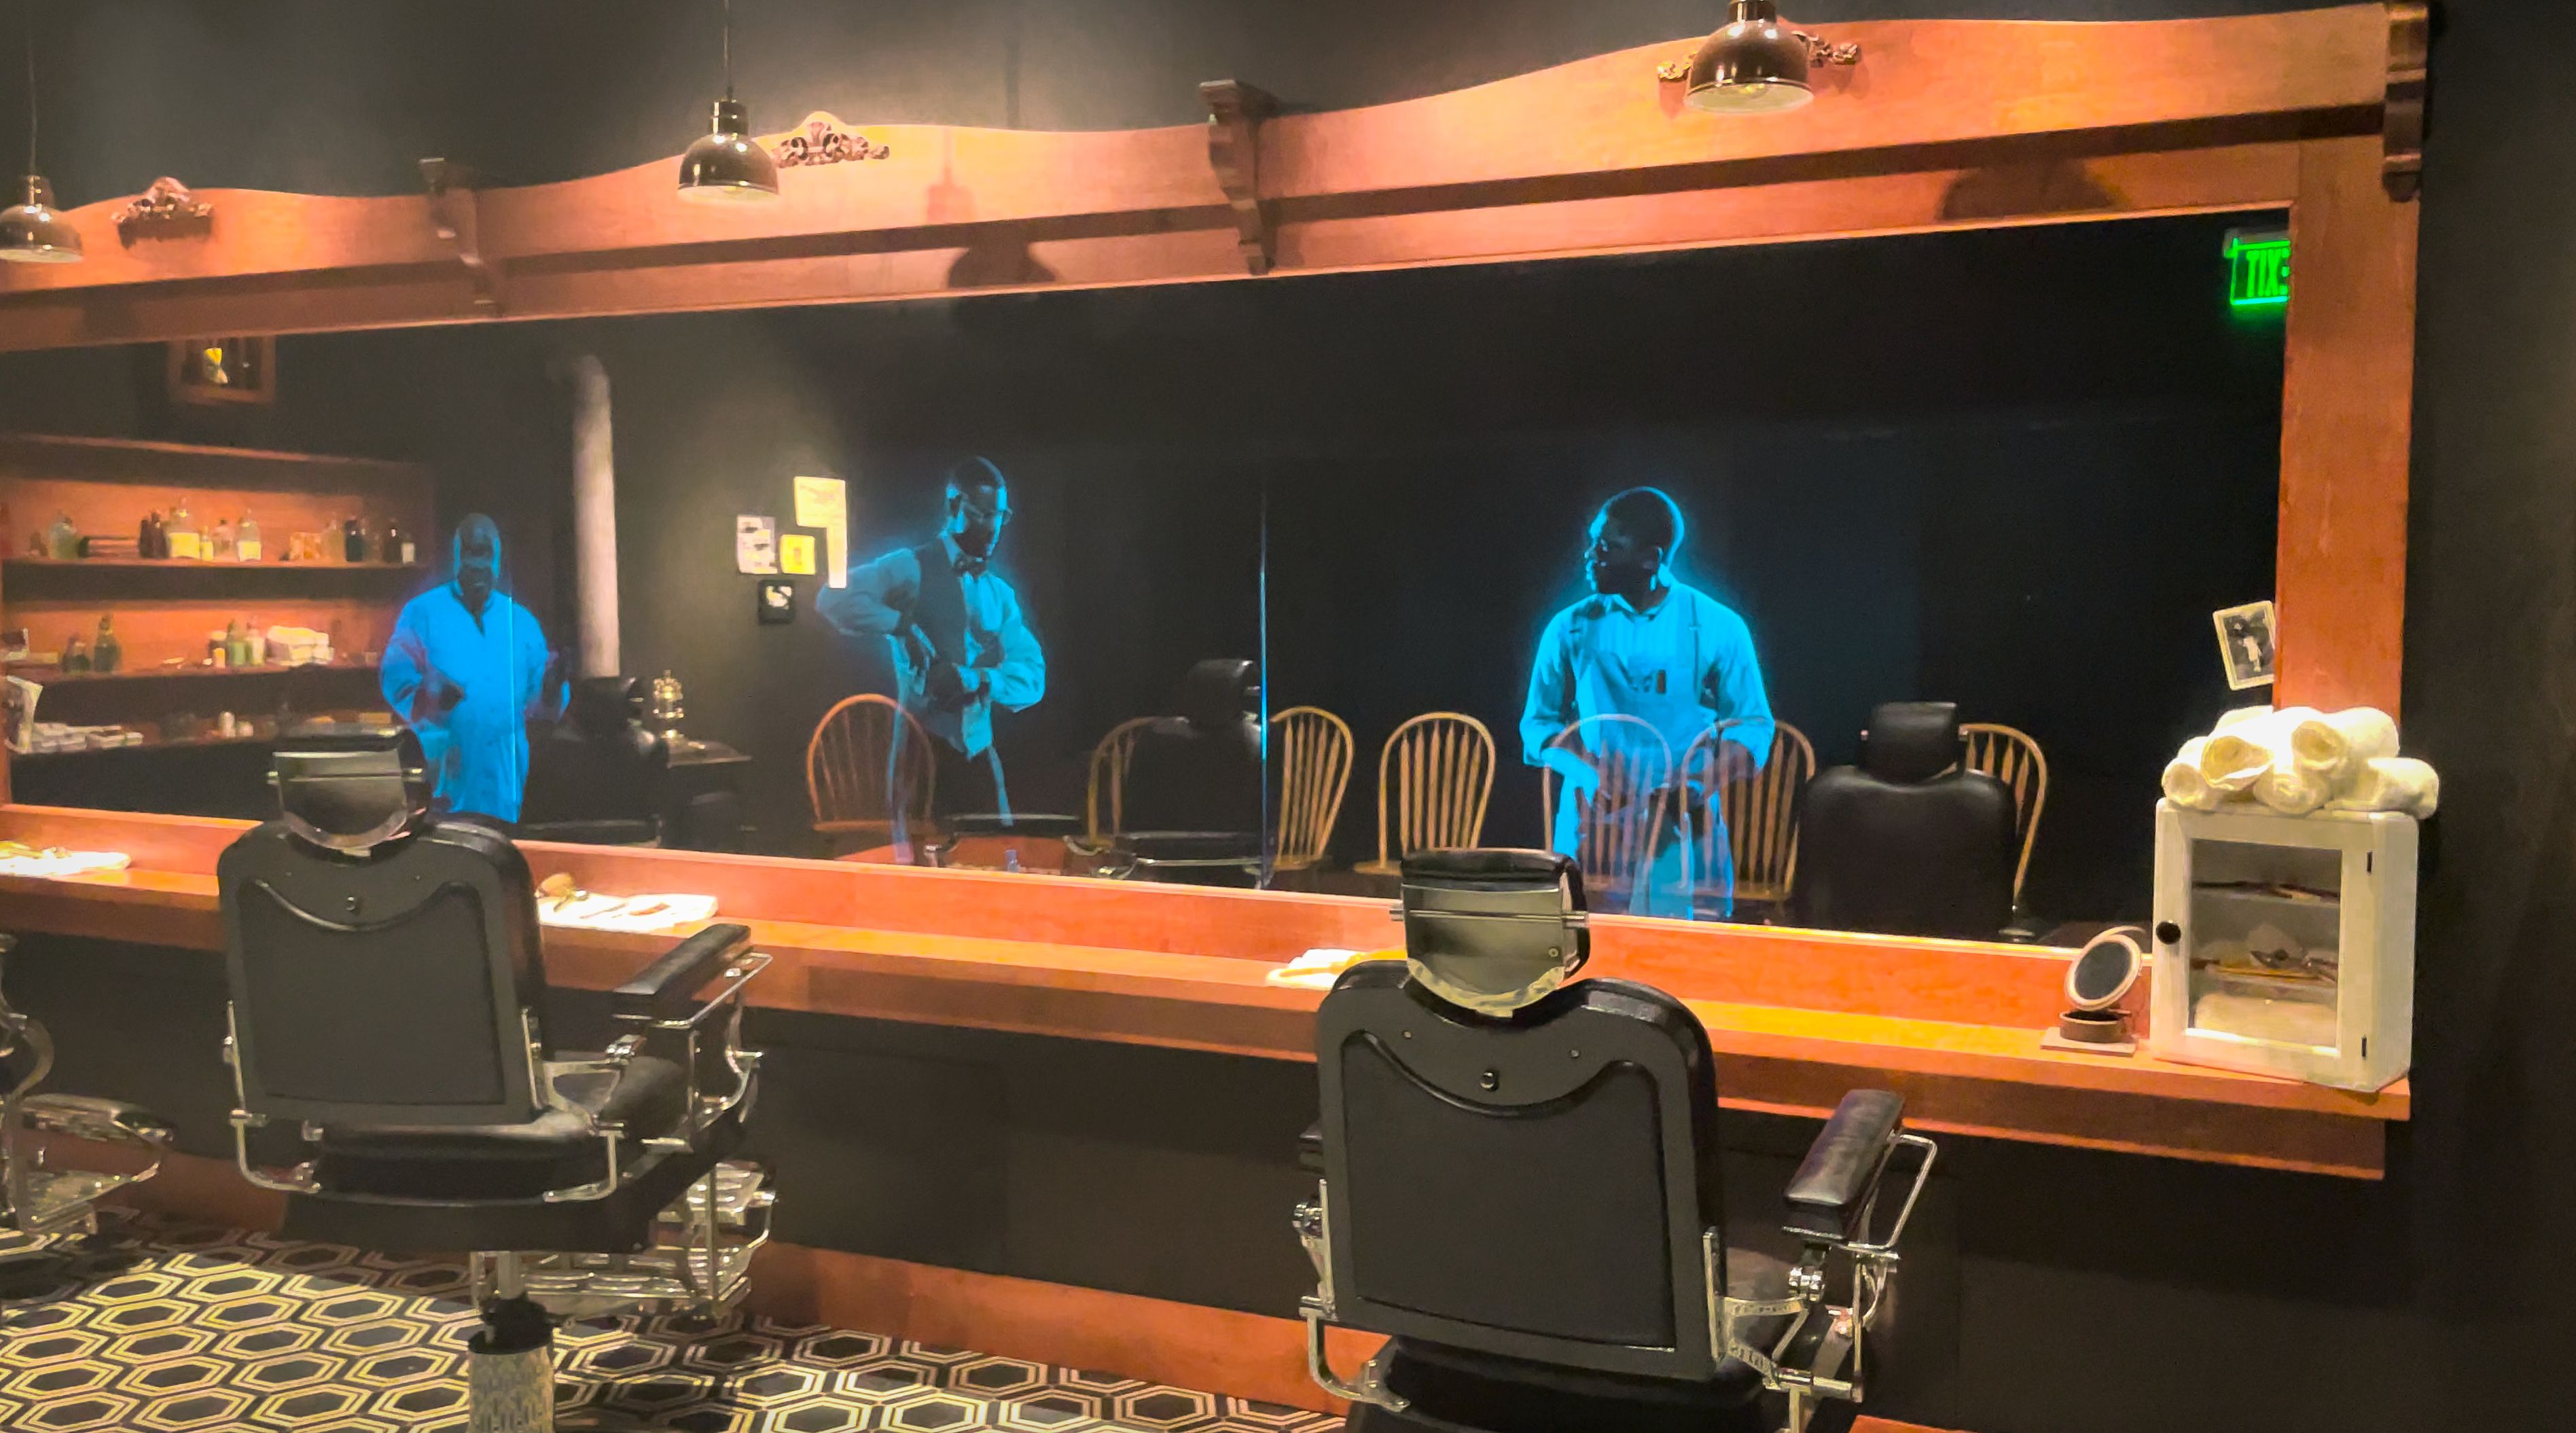 A period barbershop comes to life with holographic barbers at the Greenwood Rising History Center, a museum dedicated to telling the story of the 1921 Tulsa Race Massacre.